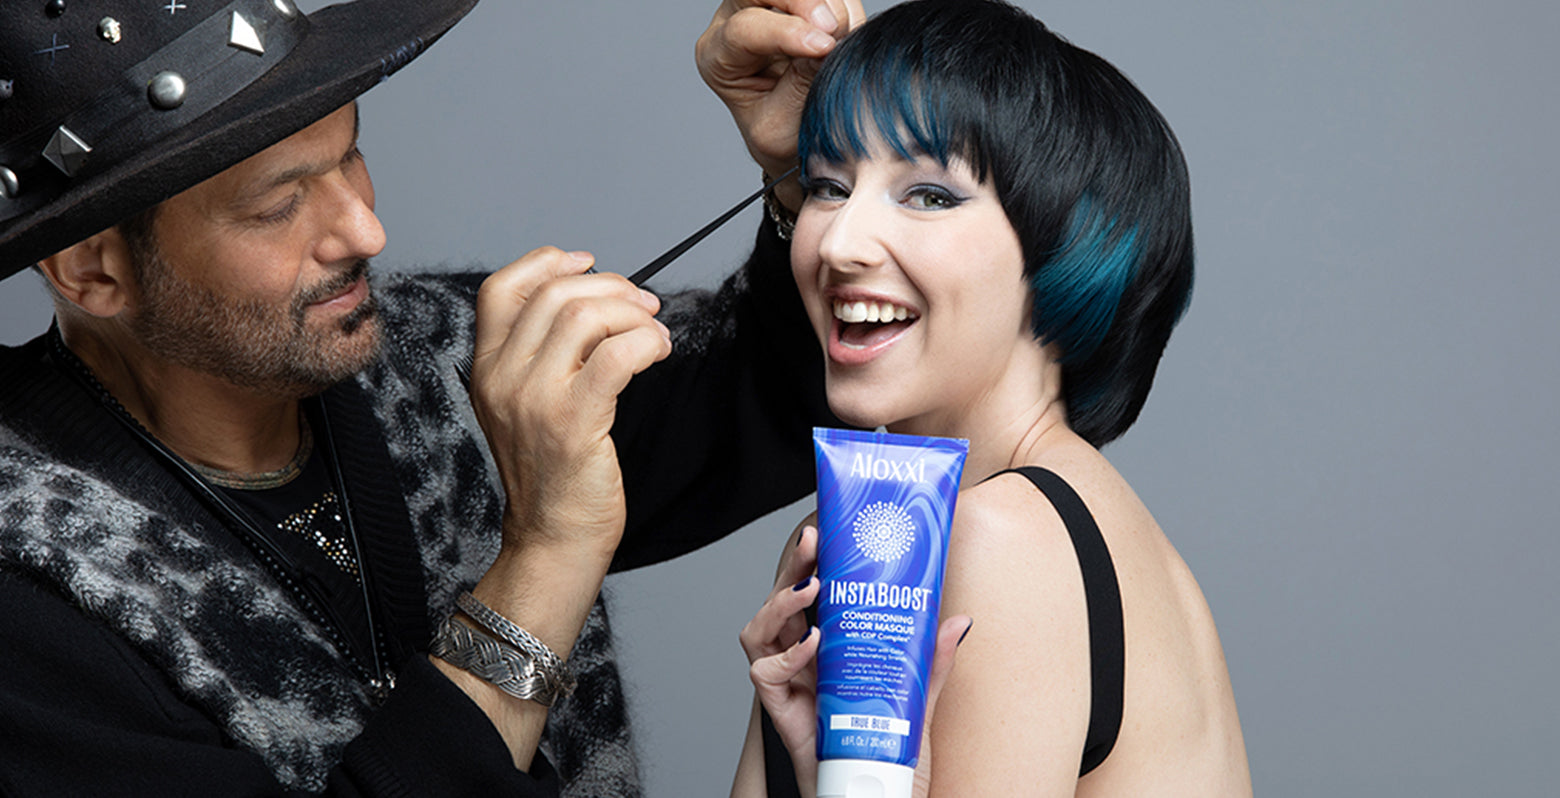 Achieving Vibrant Hair Colour with Aloxxi’s New Wave Collection